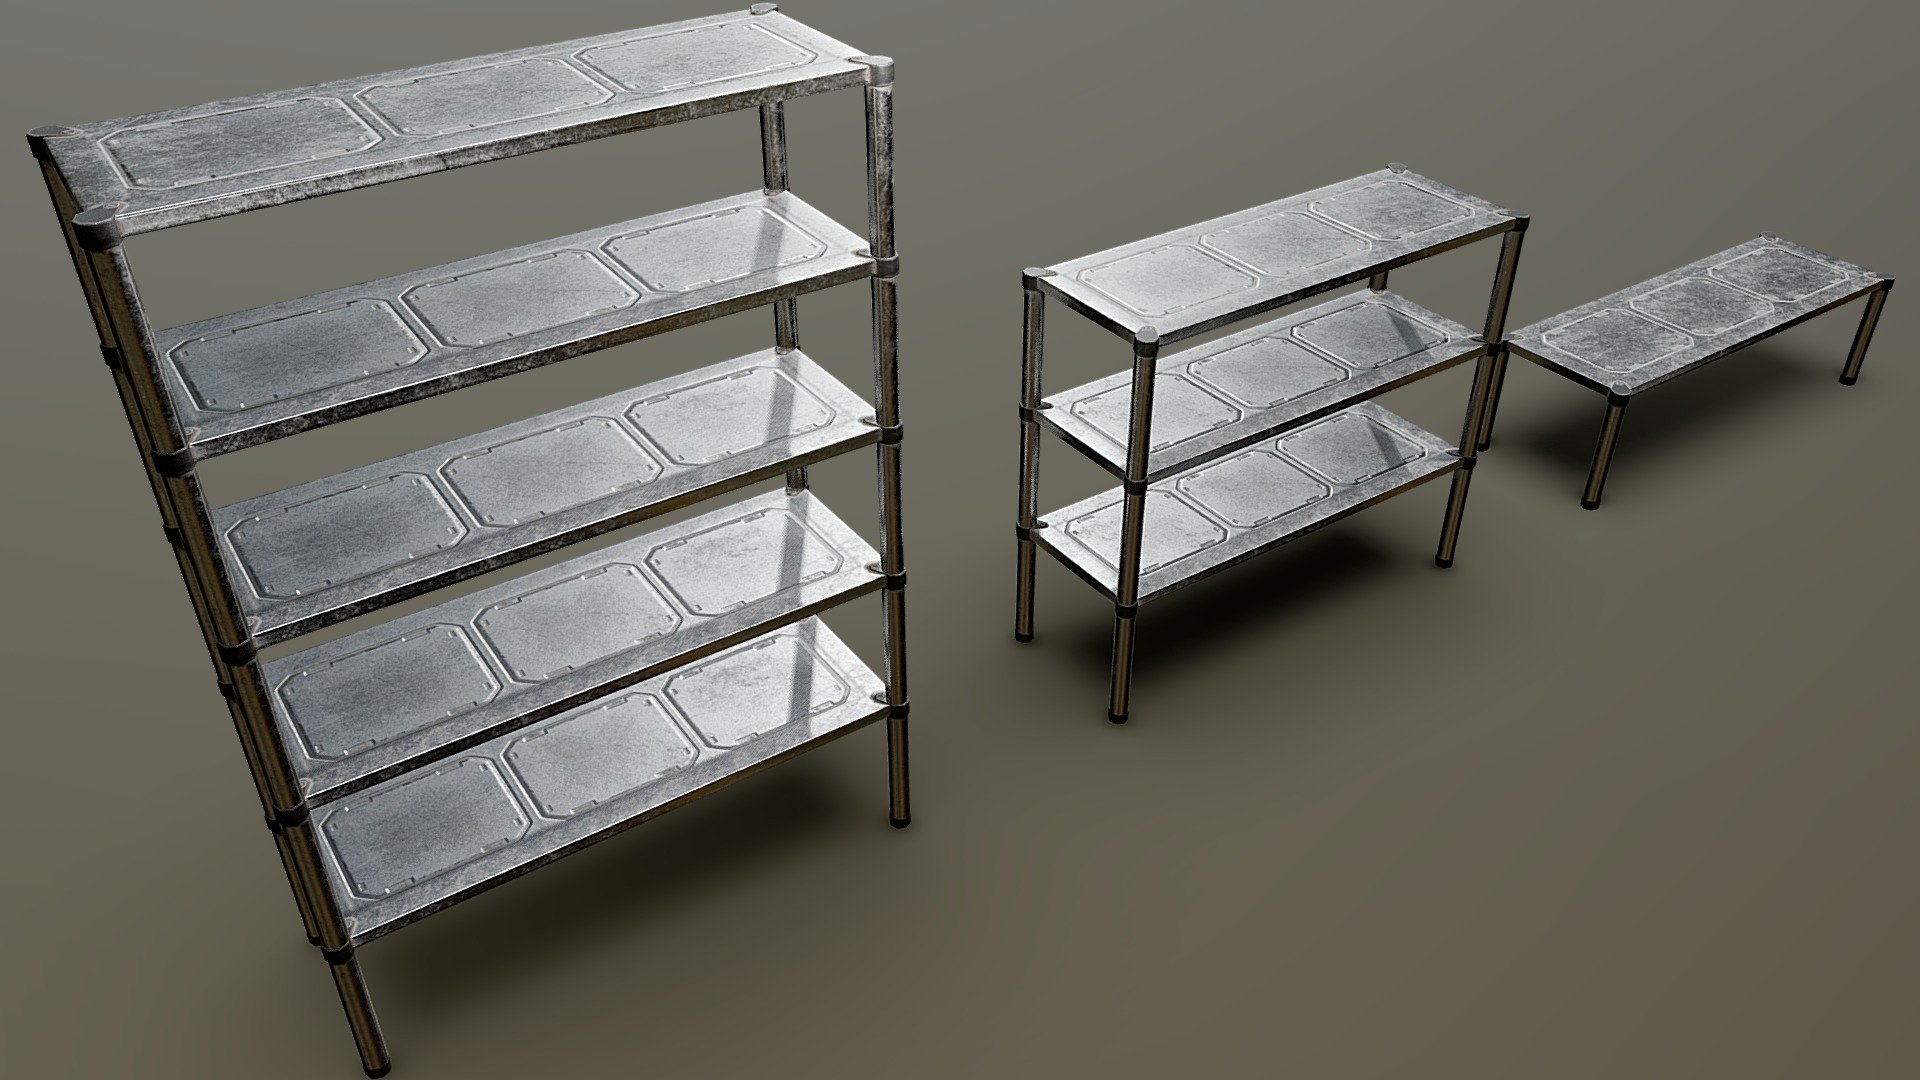 A set of low poly modern metal shelf/Bench assets in varying sizes. Models include detailed texture work including realistic weathering. Assets created within Blender and Substance painter.

PBR - Metallic Roughness - 4k 8 Bit 3d model